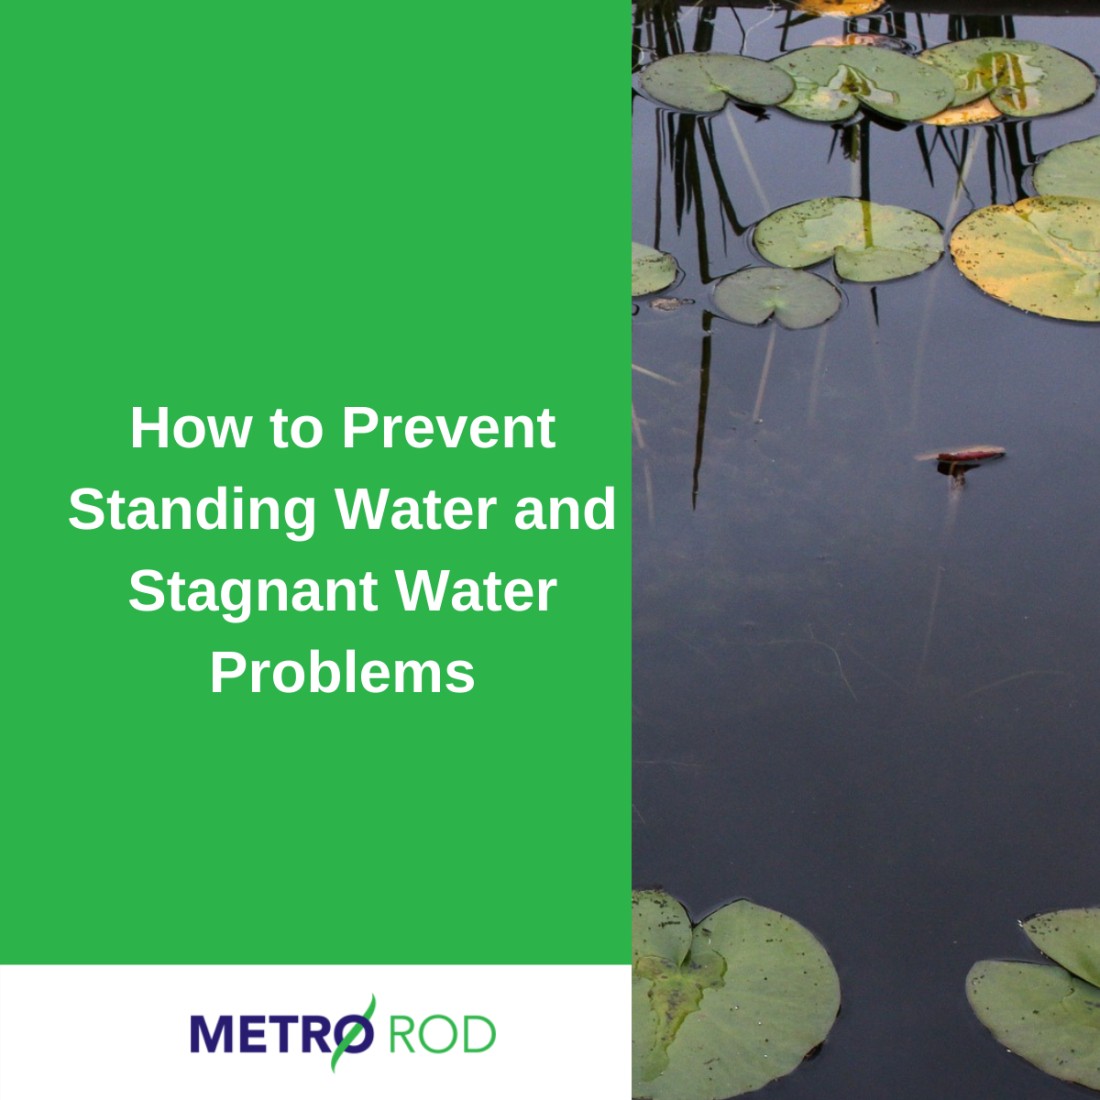 How to Prevent Standing Water and Stagnant Water Problems